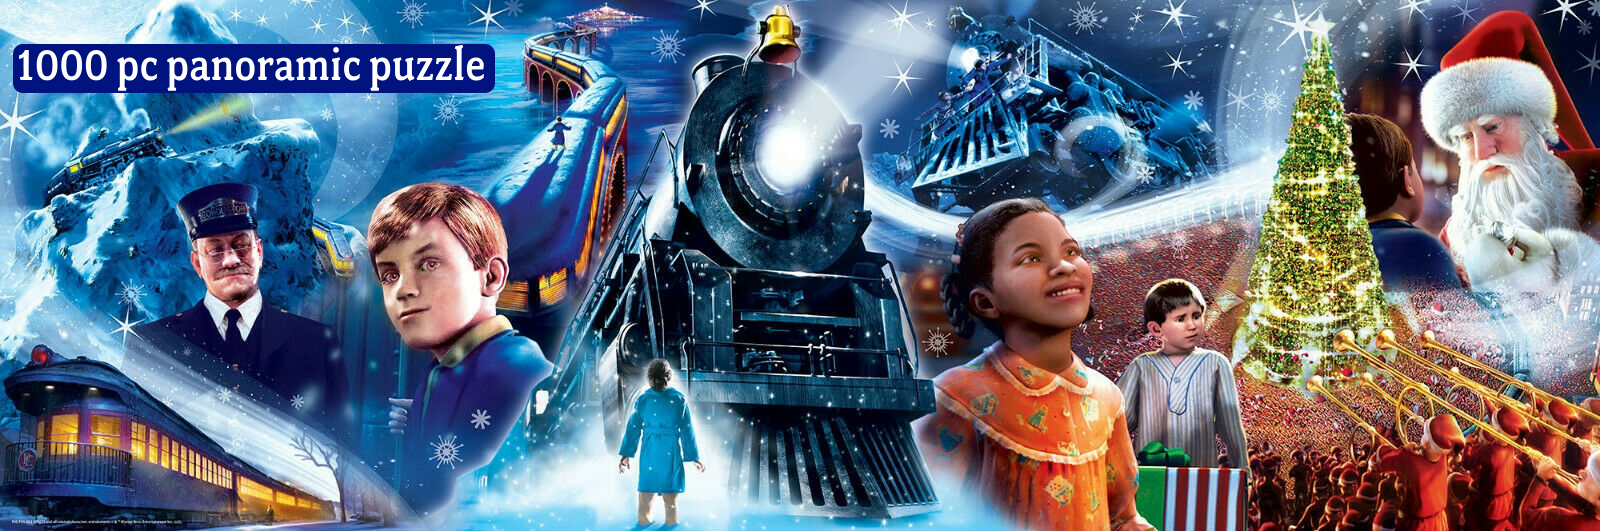 Puzzle: 1000 pcs - The Polar Express panoramic | North of Exile Games